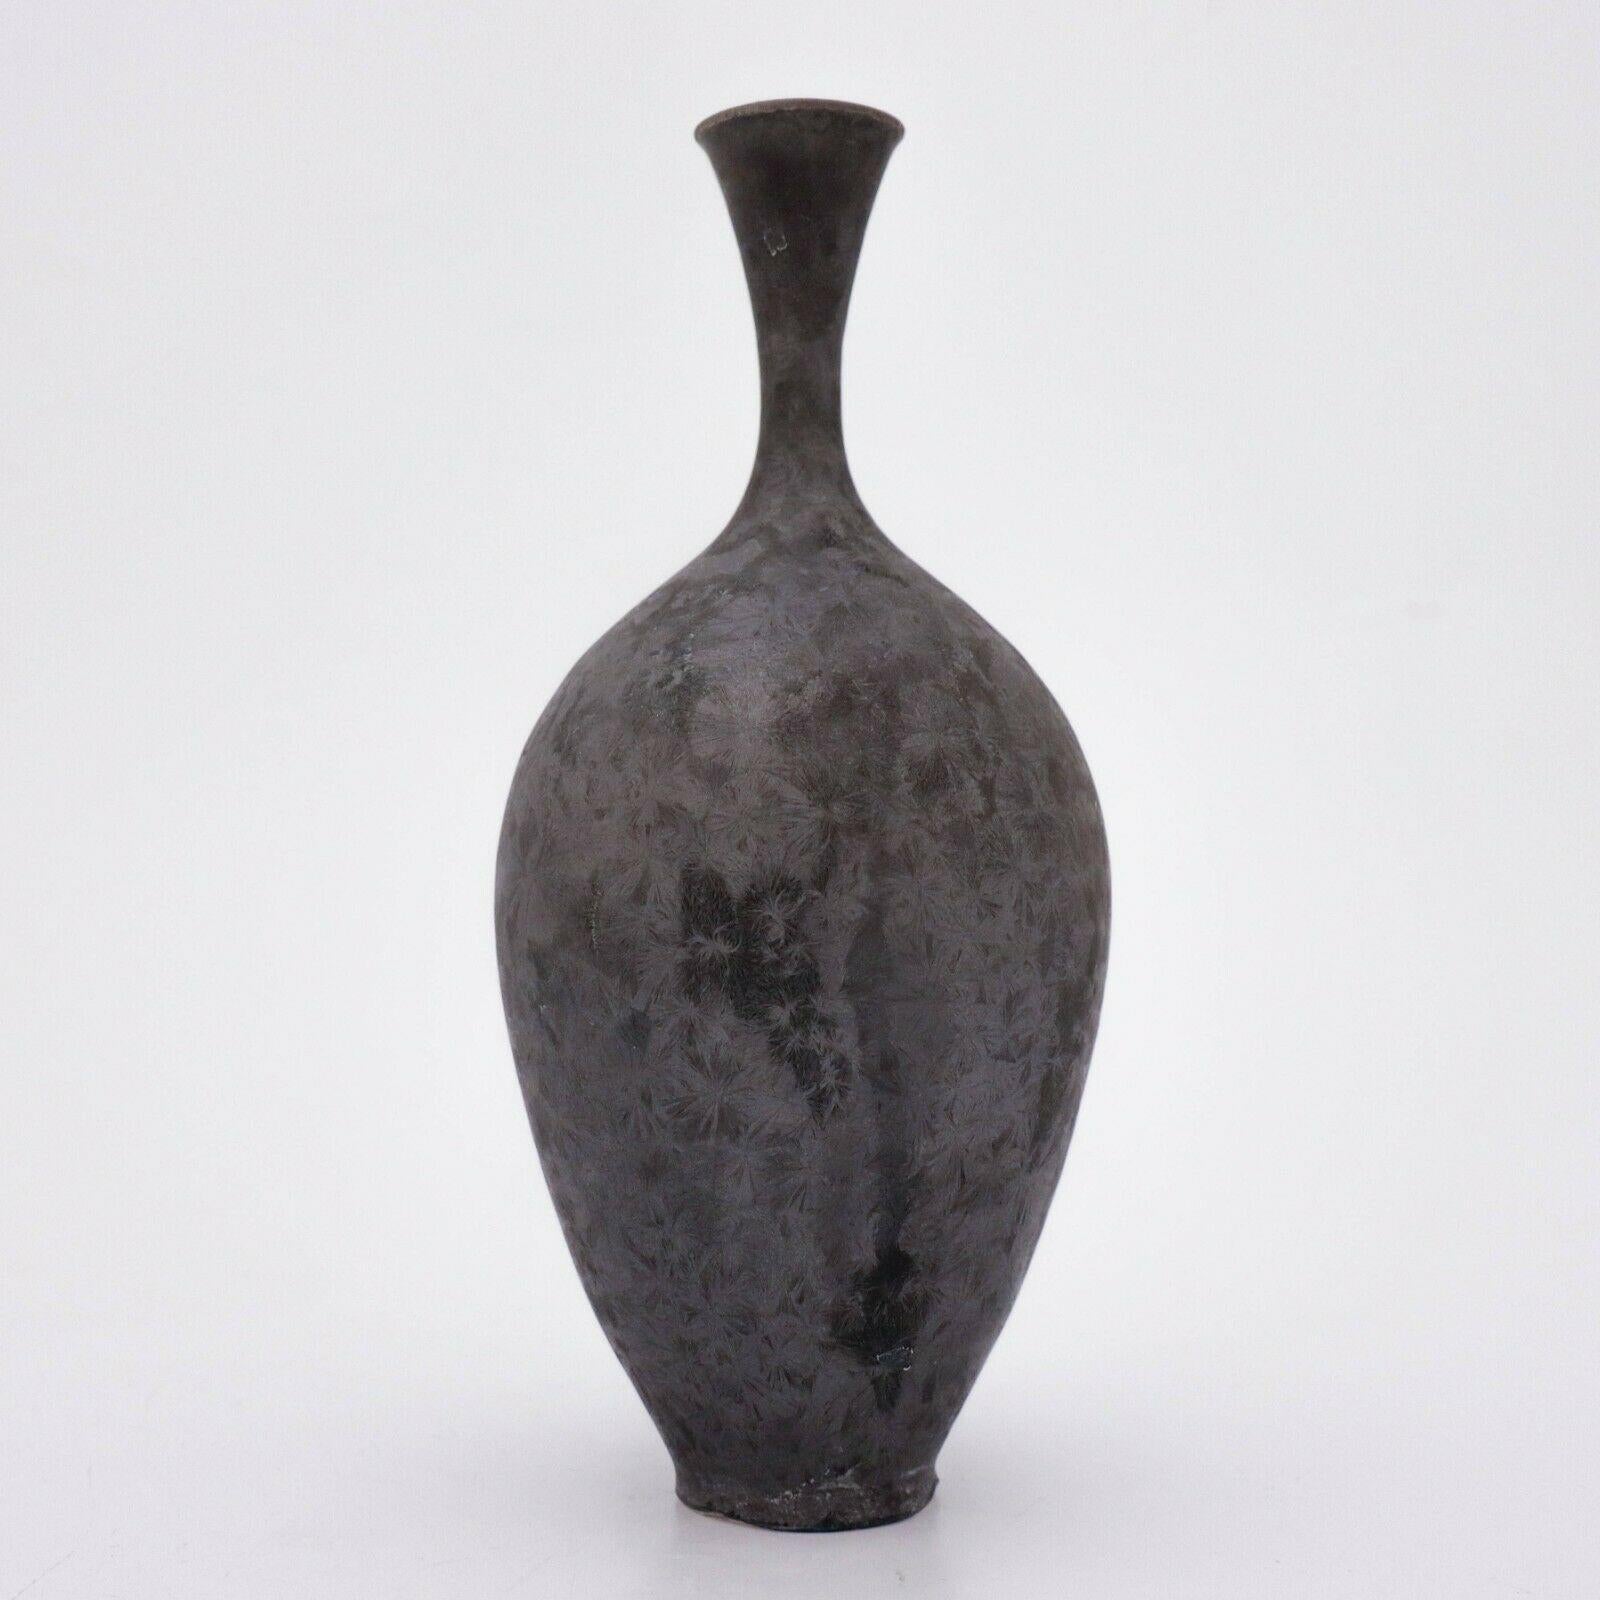 A unique vase in a matte gray crystalline glaze created by the contemporary Swedish artist Isak Isaksson in his own studio. The vase is 25 cm (10